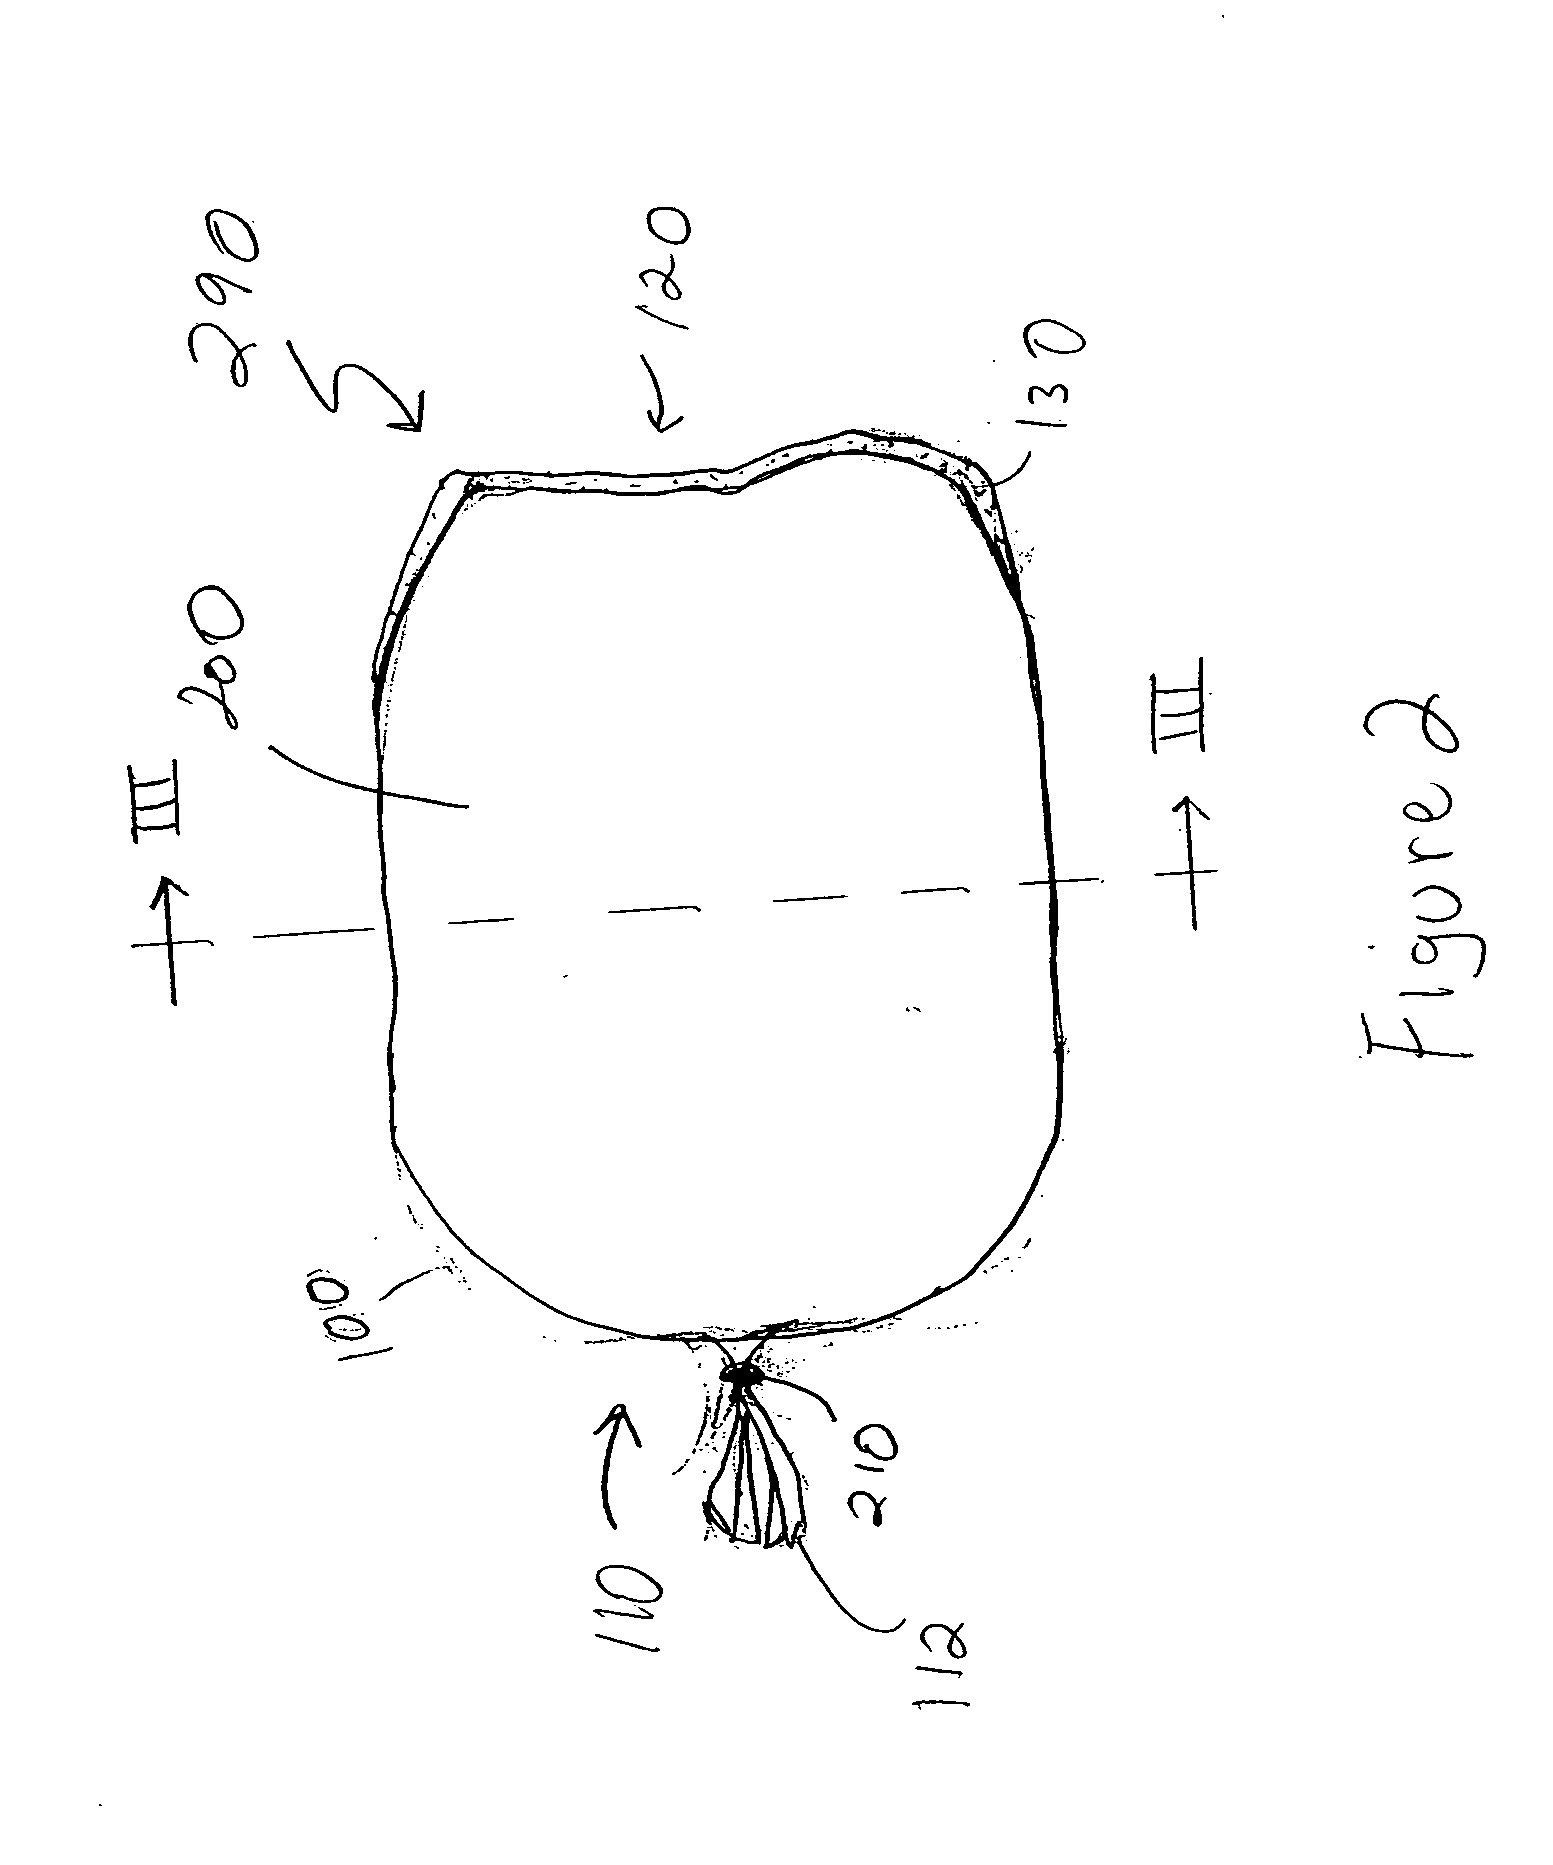 Method of packaging and cooking bag and method for packaging and preparing a meat product